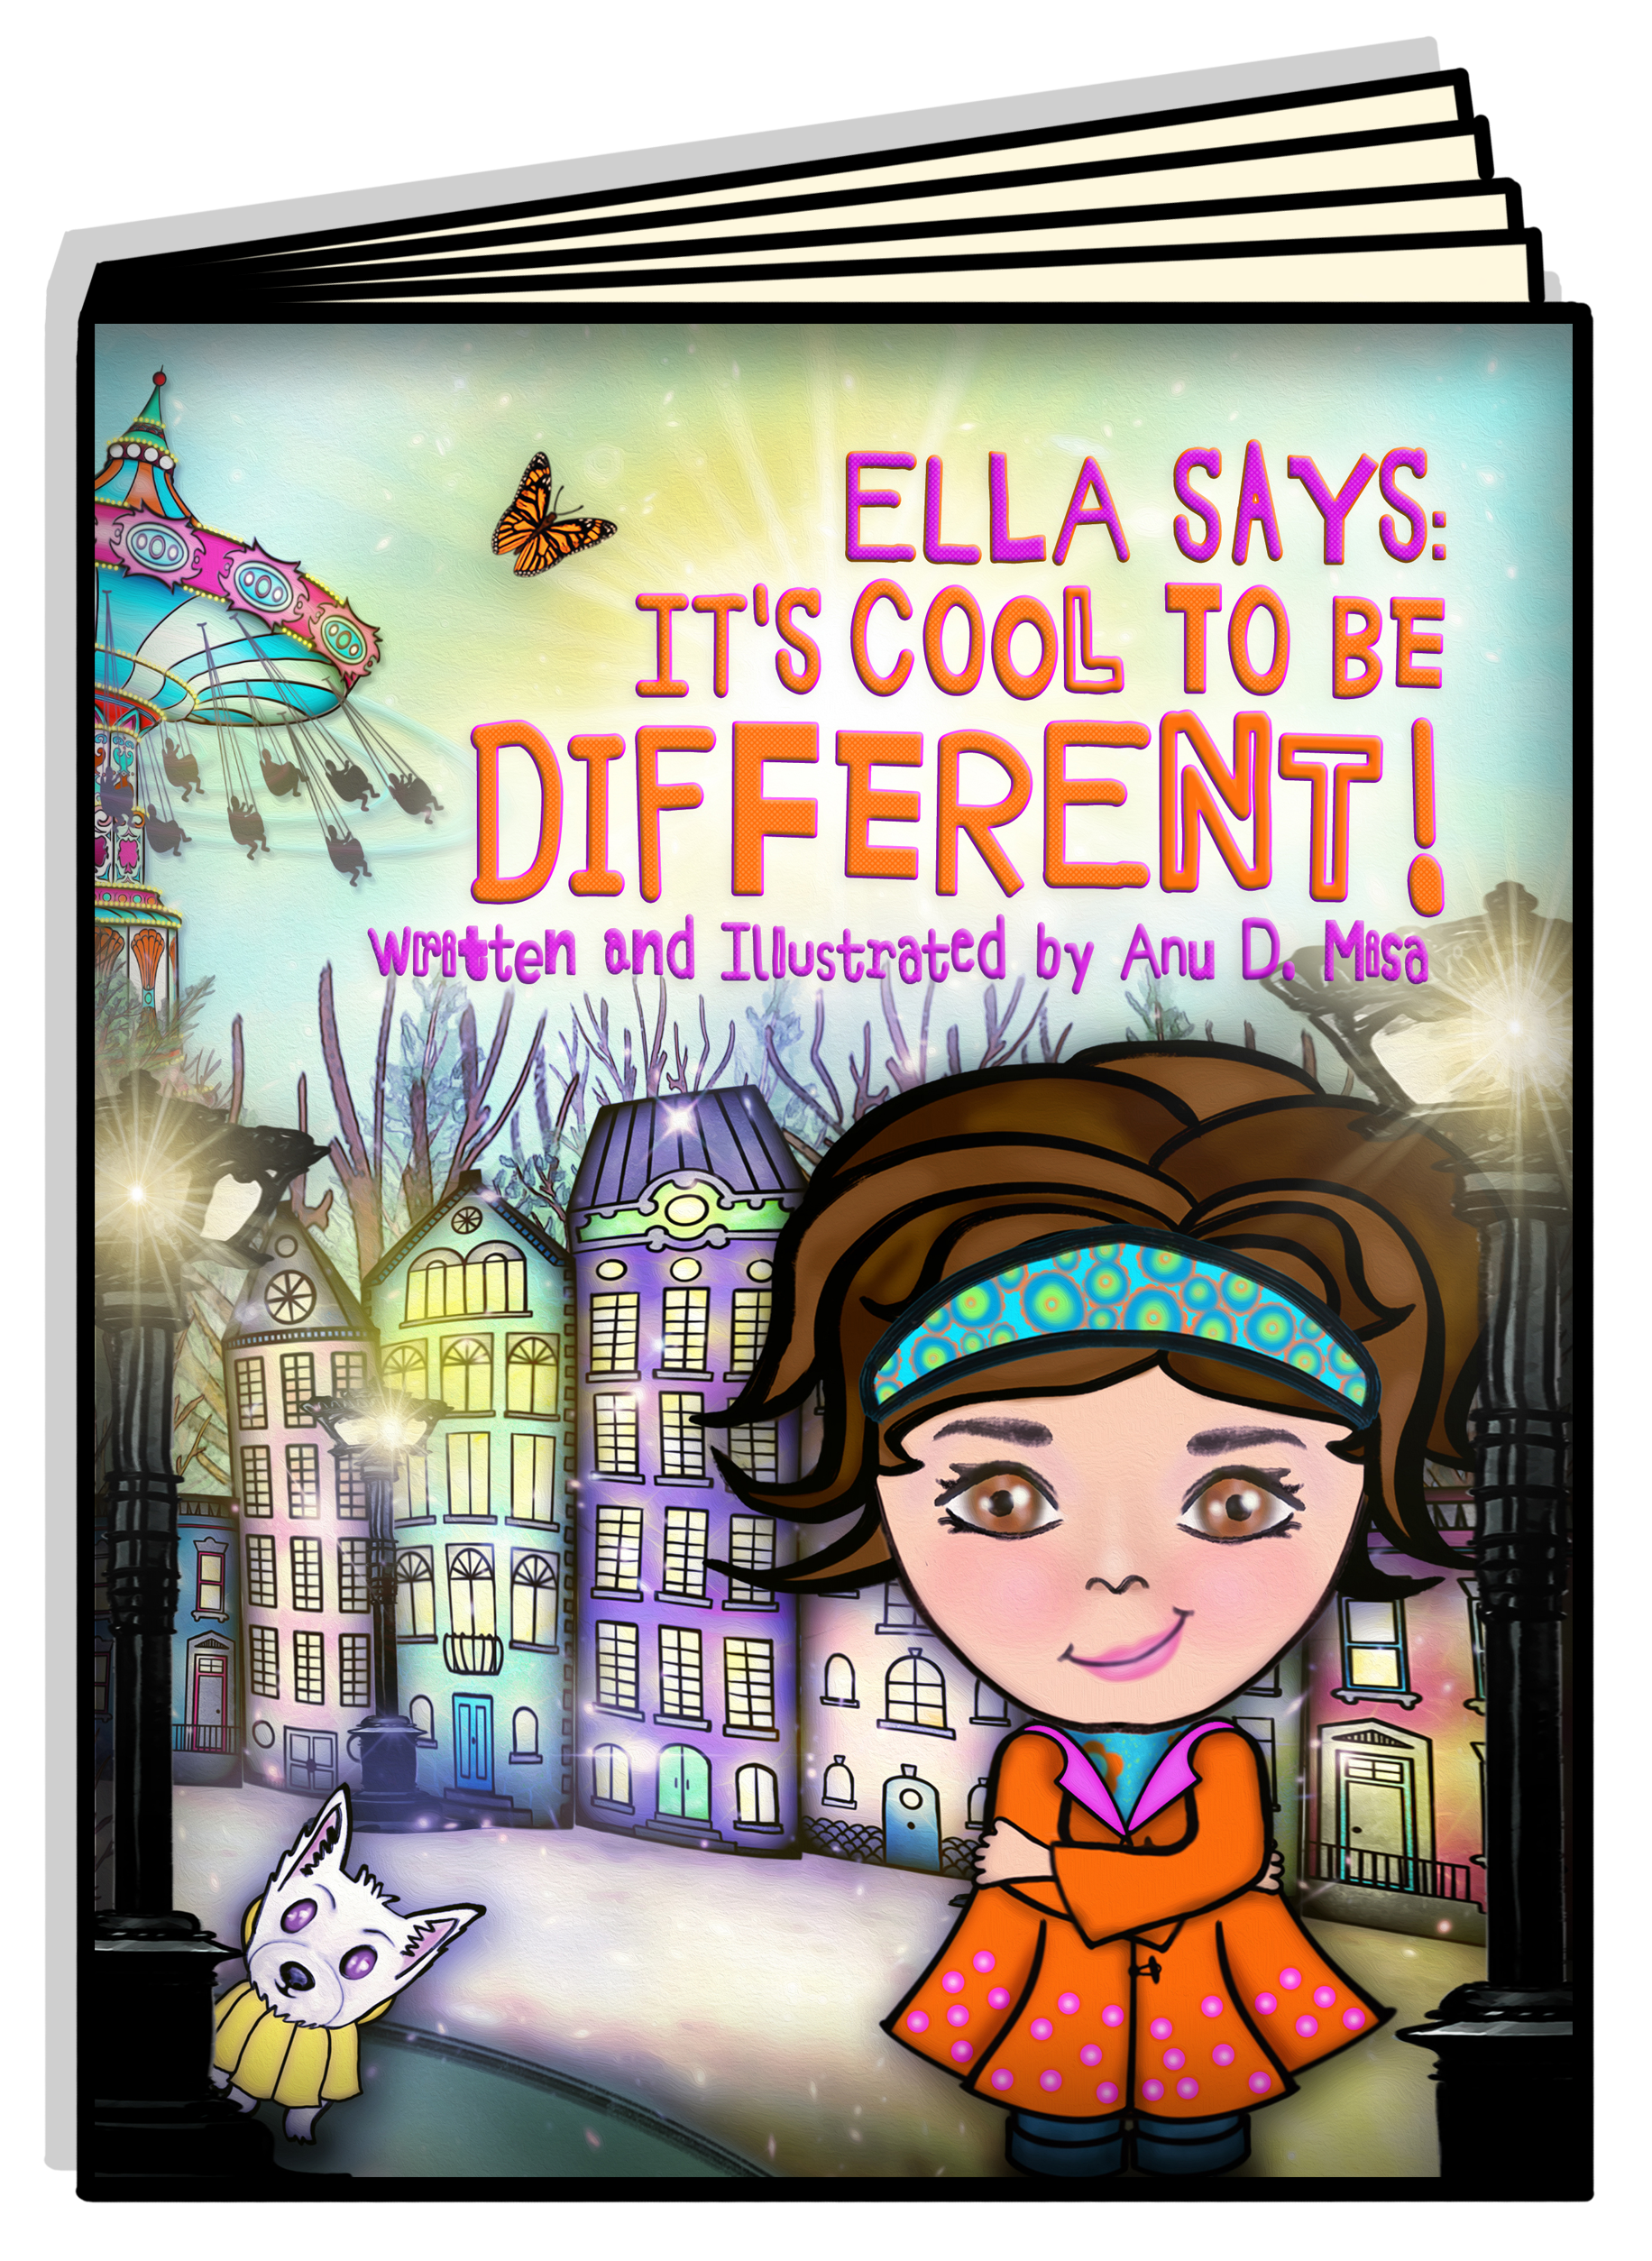 FREE: Ella Says: It’s Cool to be Different! by Anu D. Misa